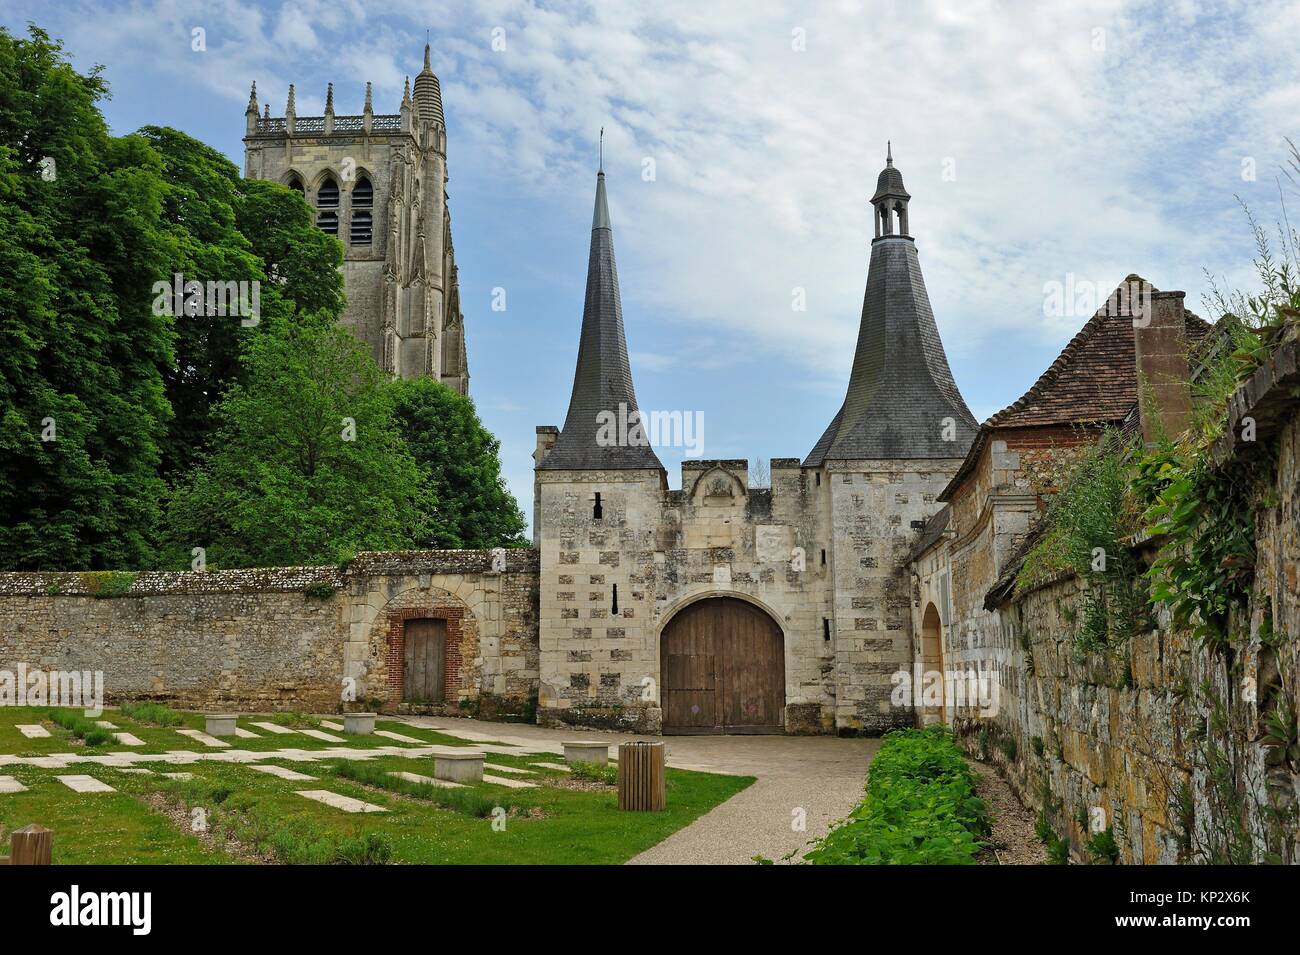 former main entrance of the Benedictine Abbey of Our Lady of Bec, Bec-Hellouin, labelled Les Plus Beaux Villages de France, Eure department, Stock Photo